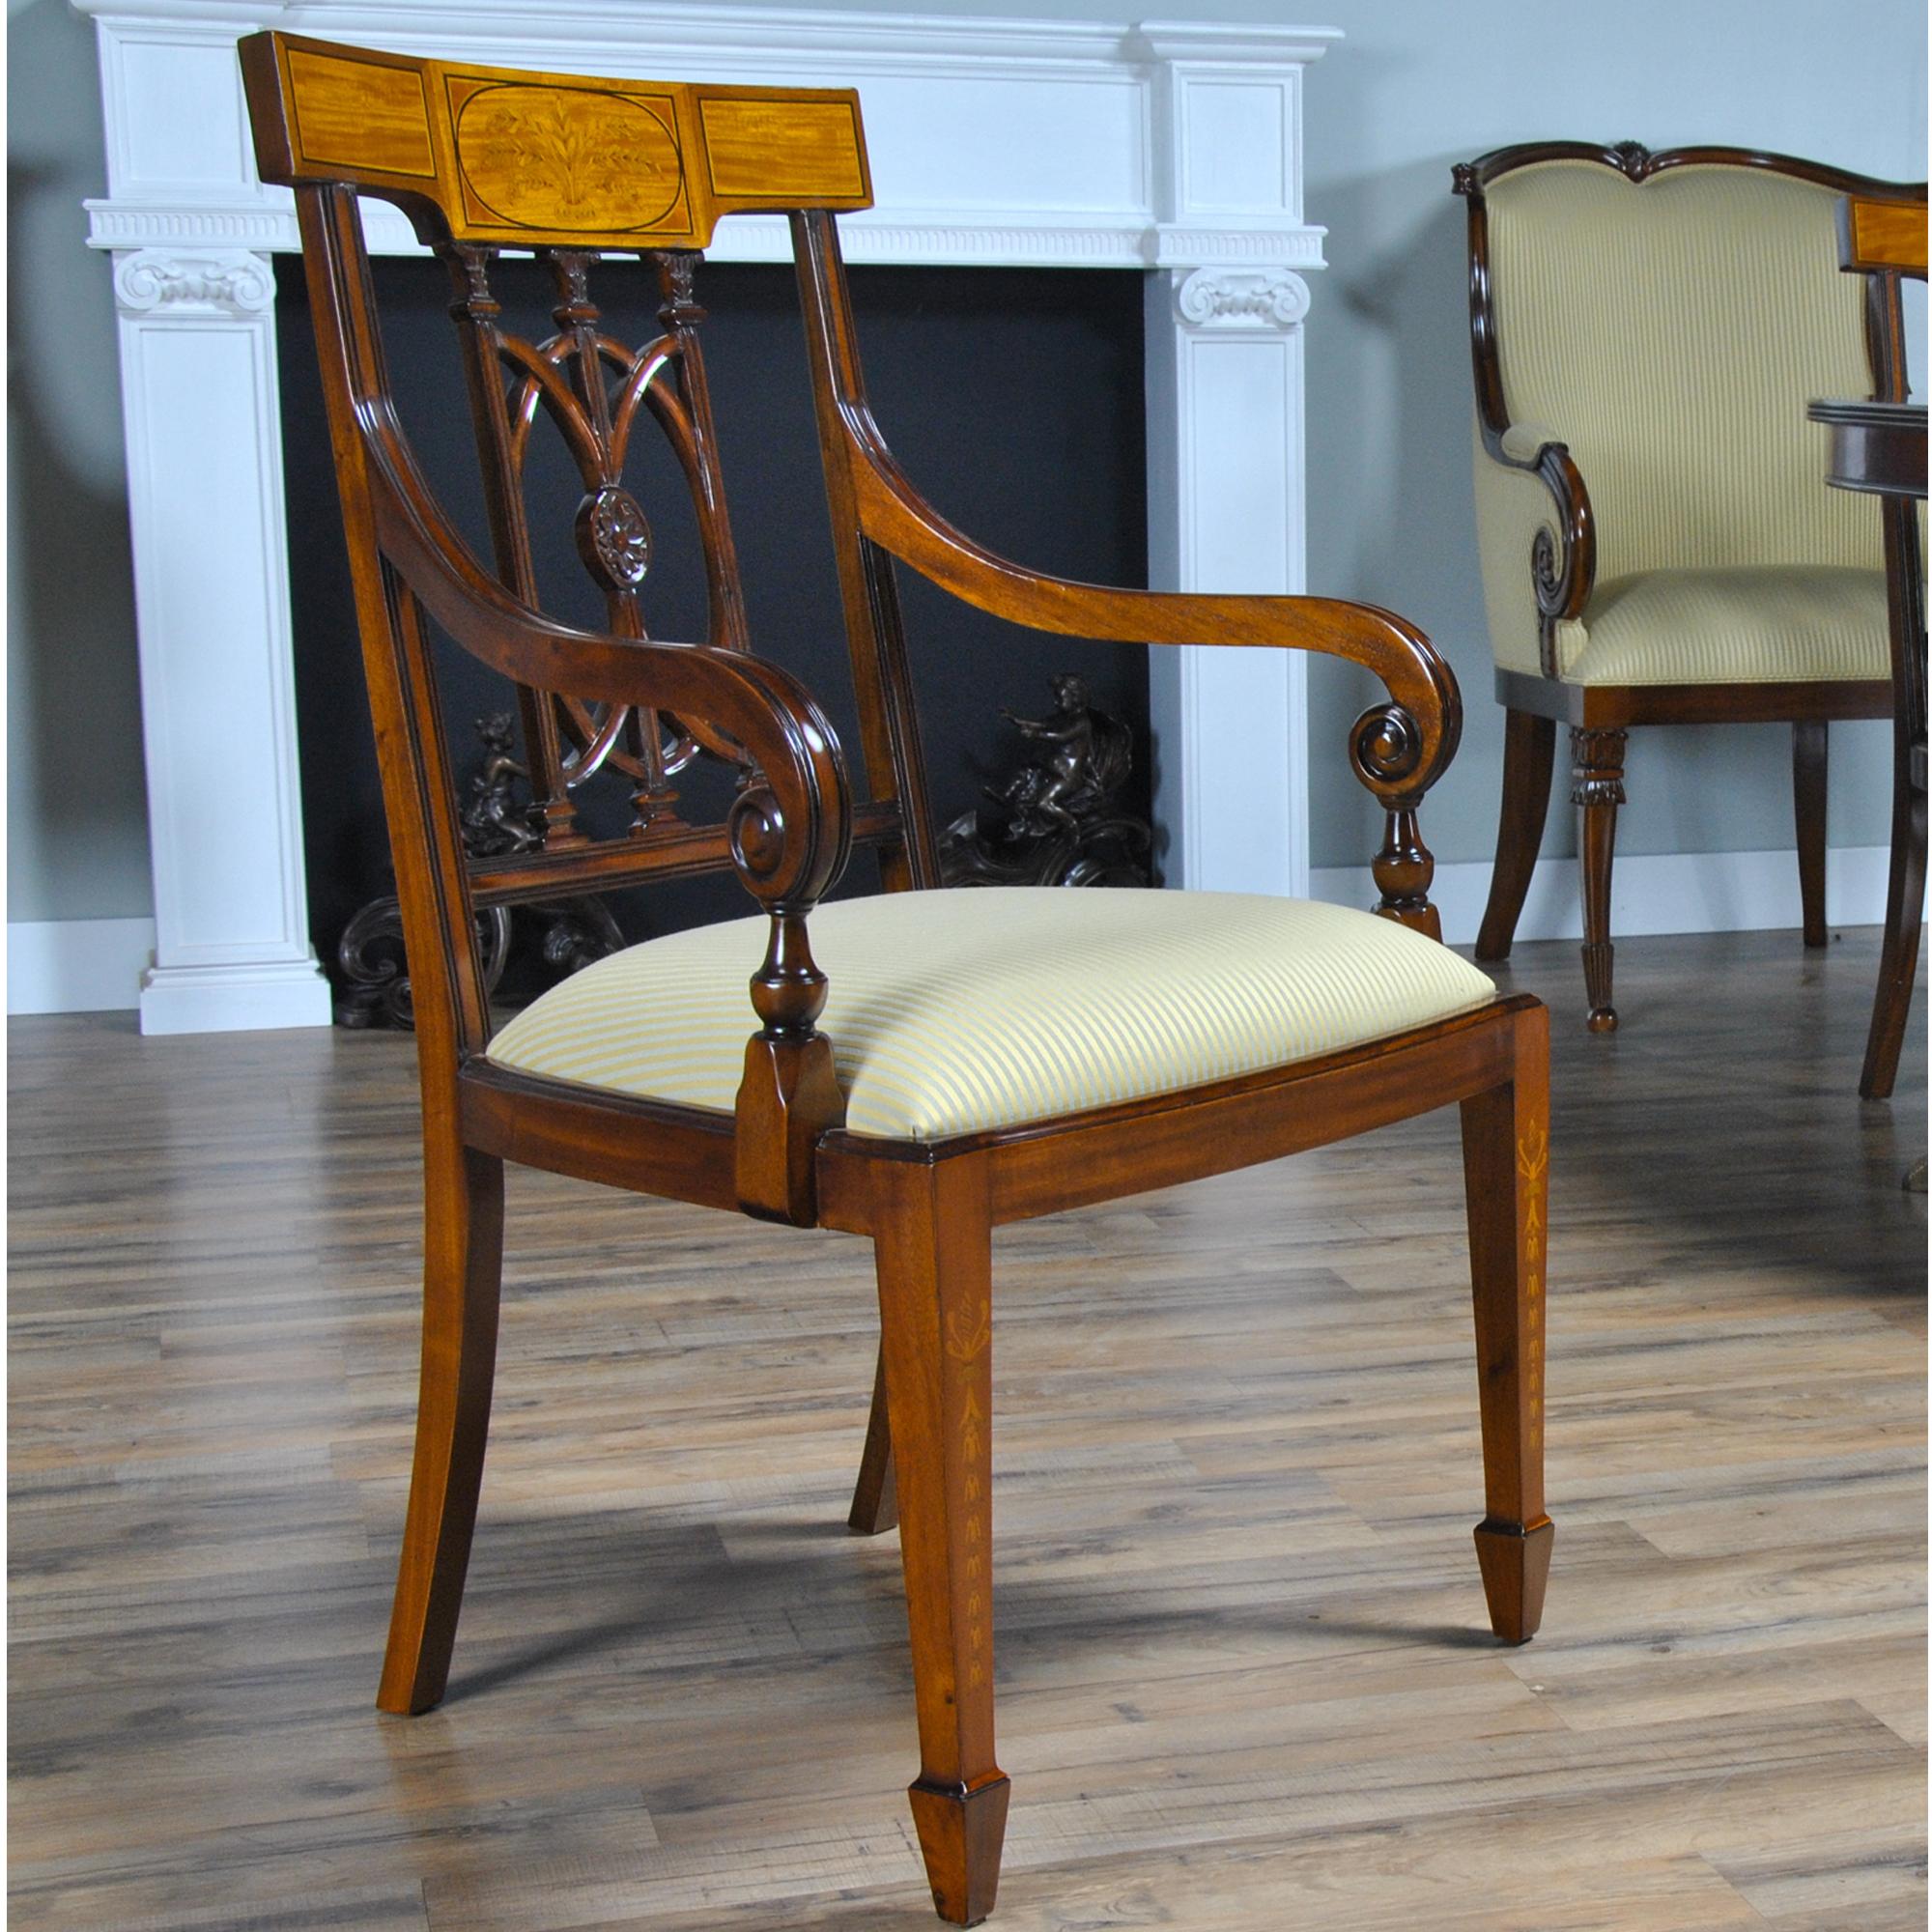 The Inlaid Hepplewhite Chairs, consisting of a set of ten chairs with 2 arm chairs and 8 side chairs. Each chair is decorated with hand inlaid panels across the crest rail, bellflower inlays along the front legs making these dining chairs an